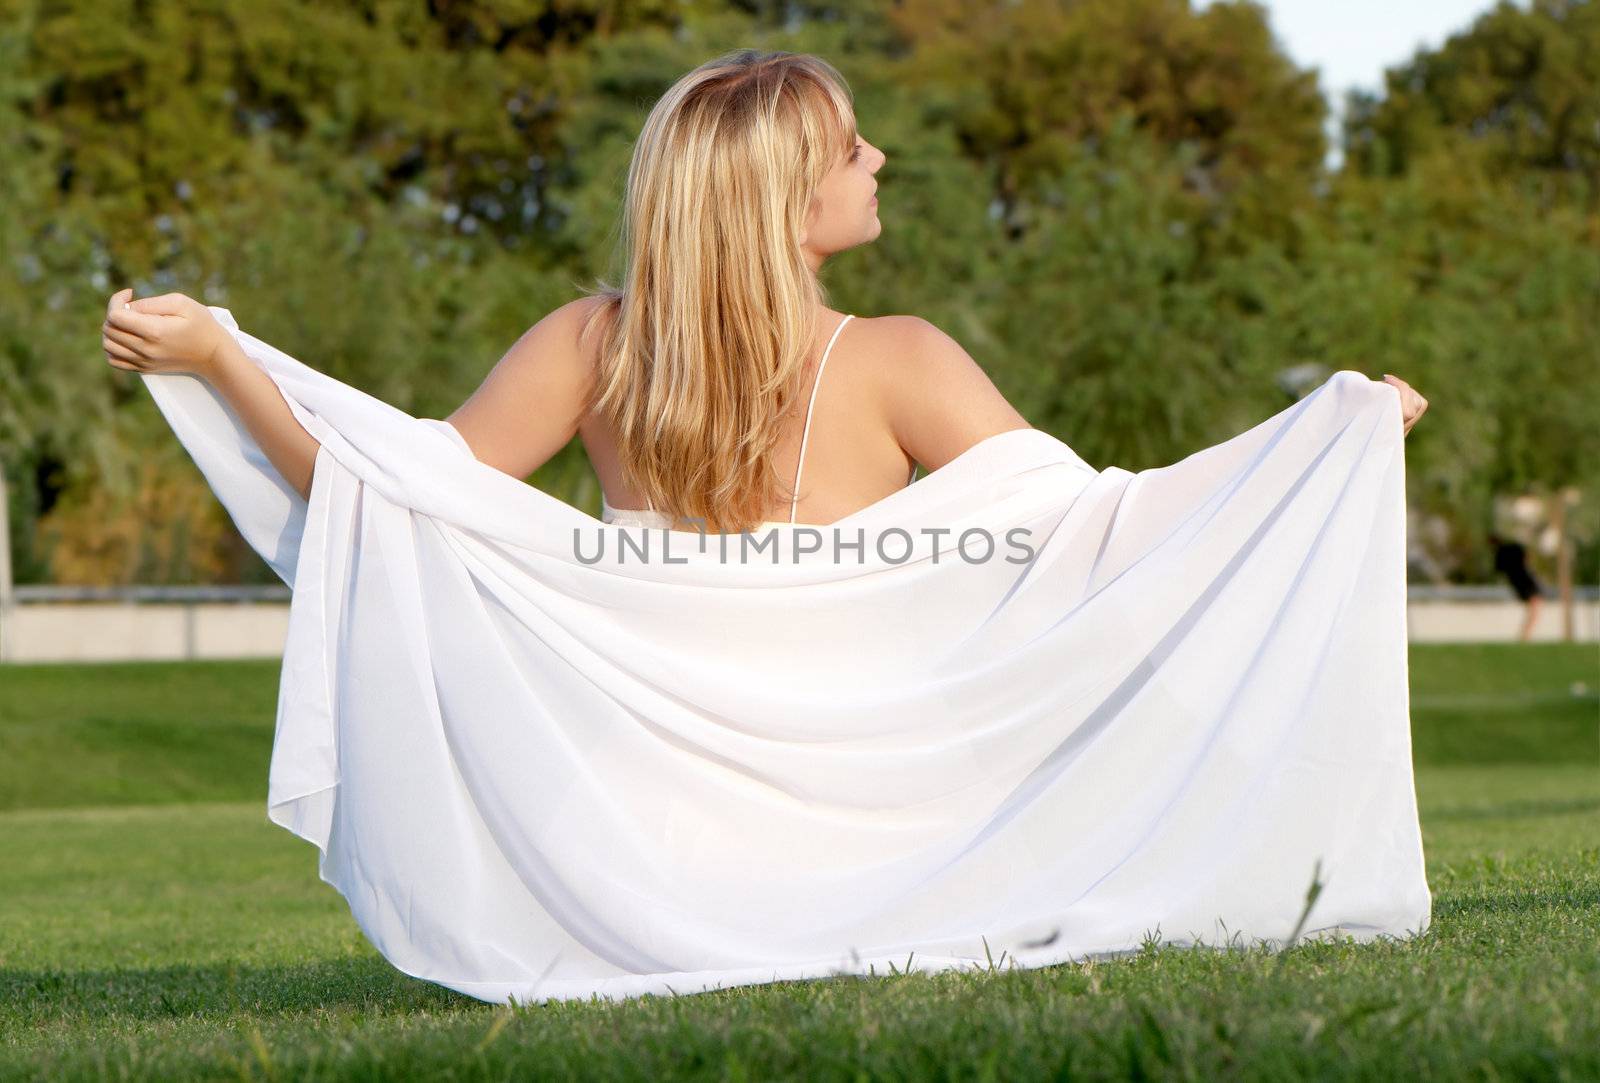 The girl with a shawl sitting on a grass in park